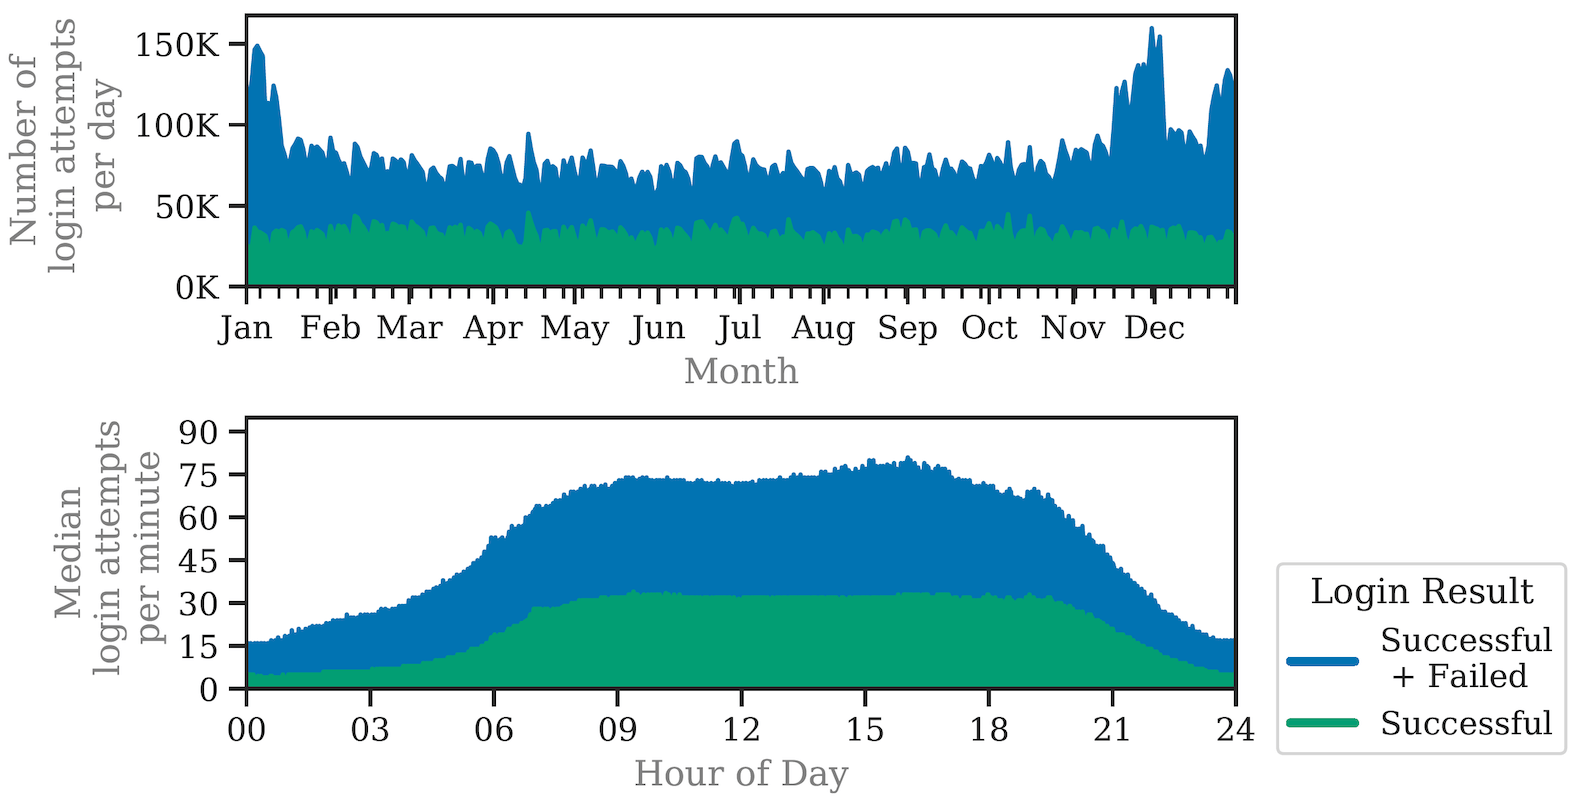 Graph showing the login count at the online service